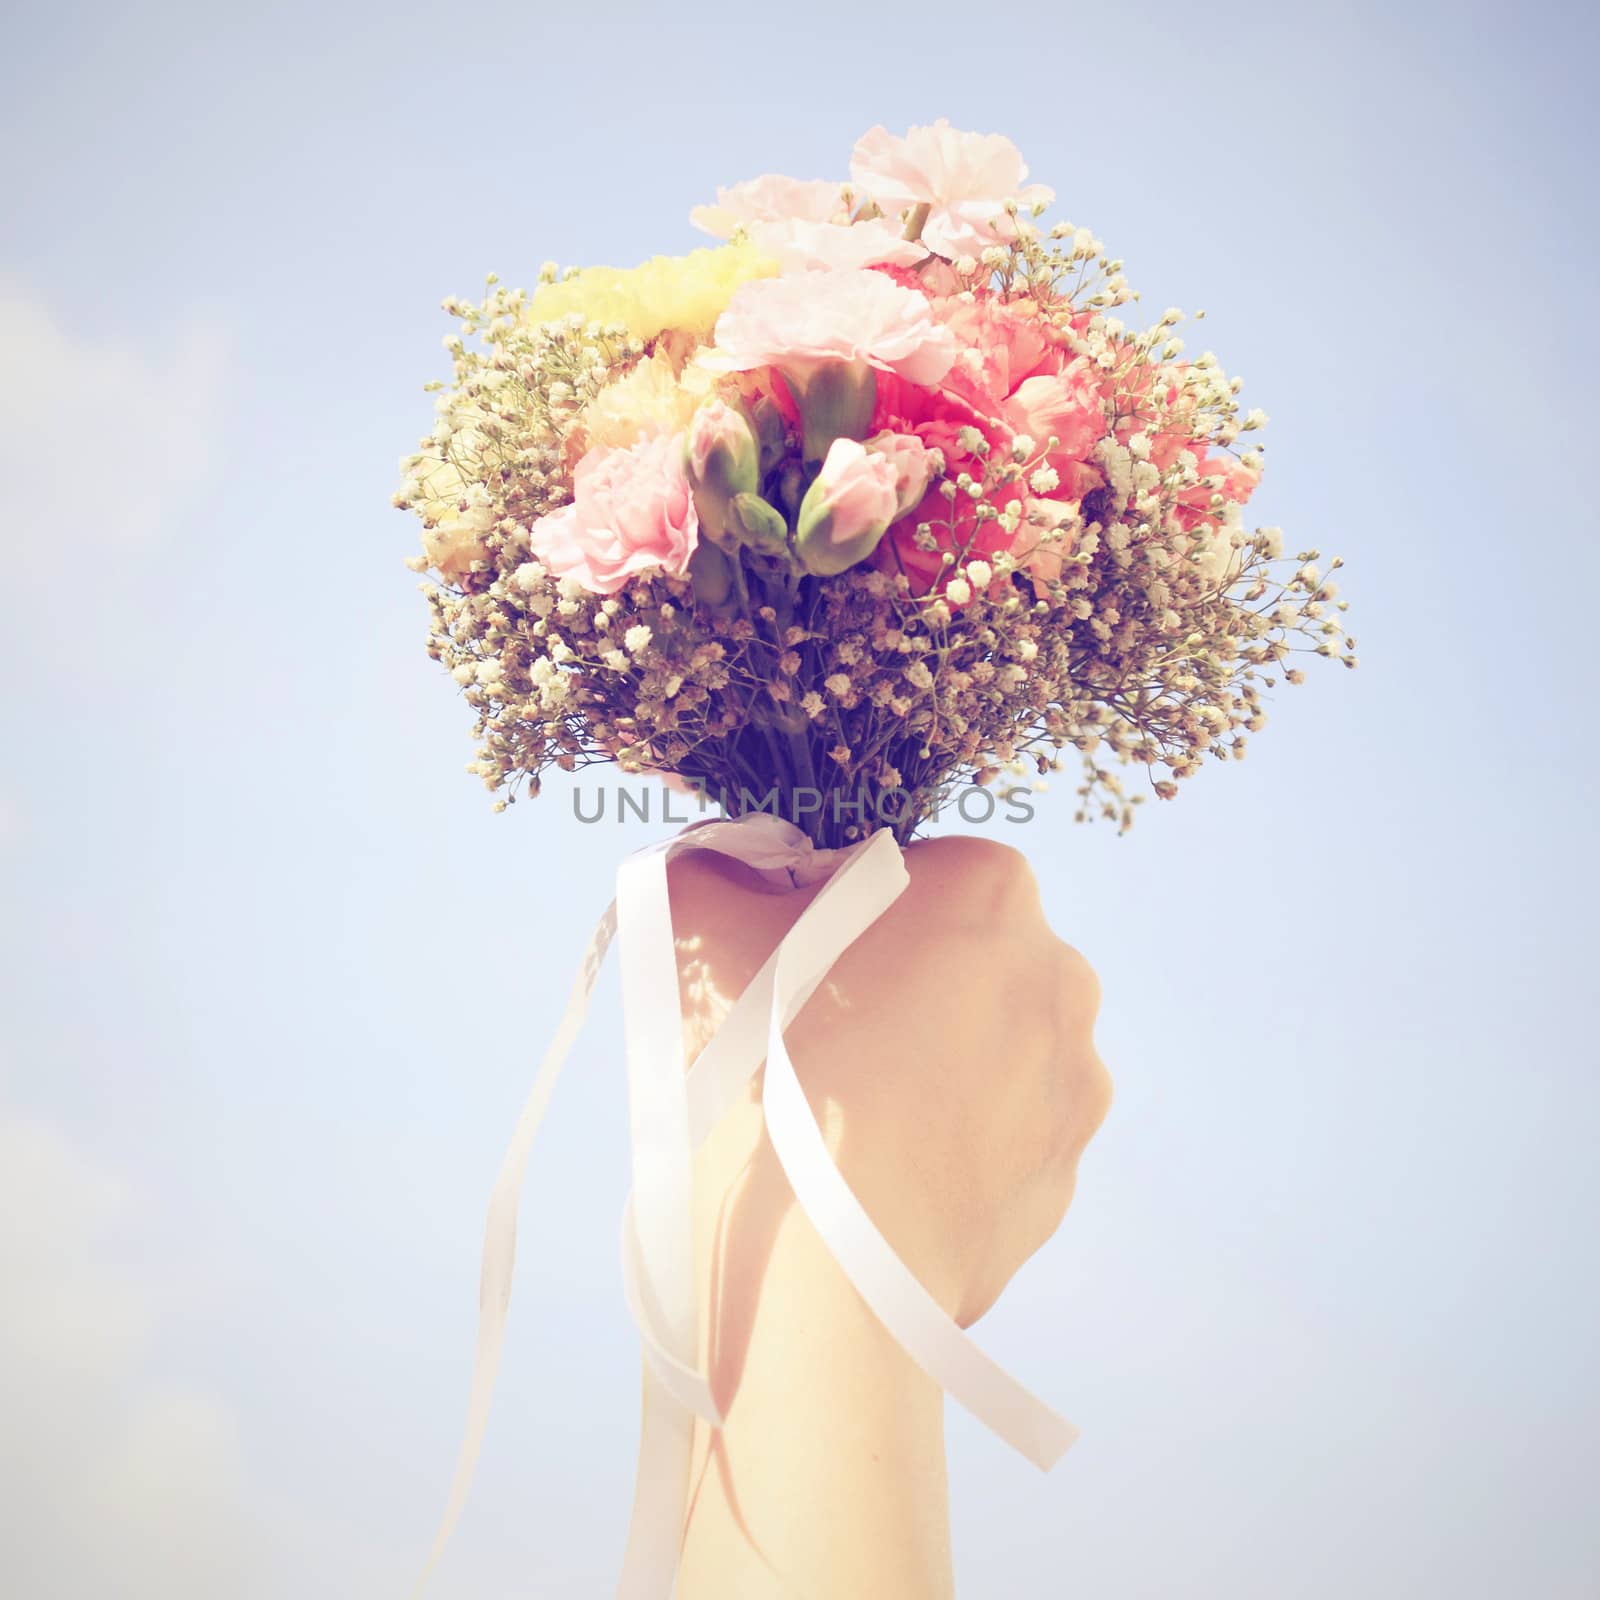 Bouquet of flower in hand and blue sky with retro filter effect by nuchylee